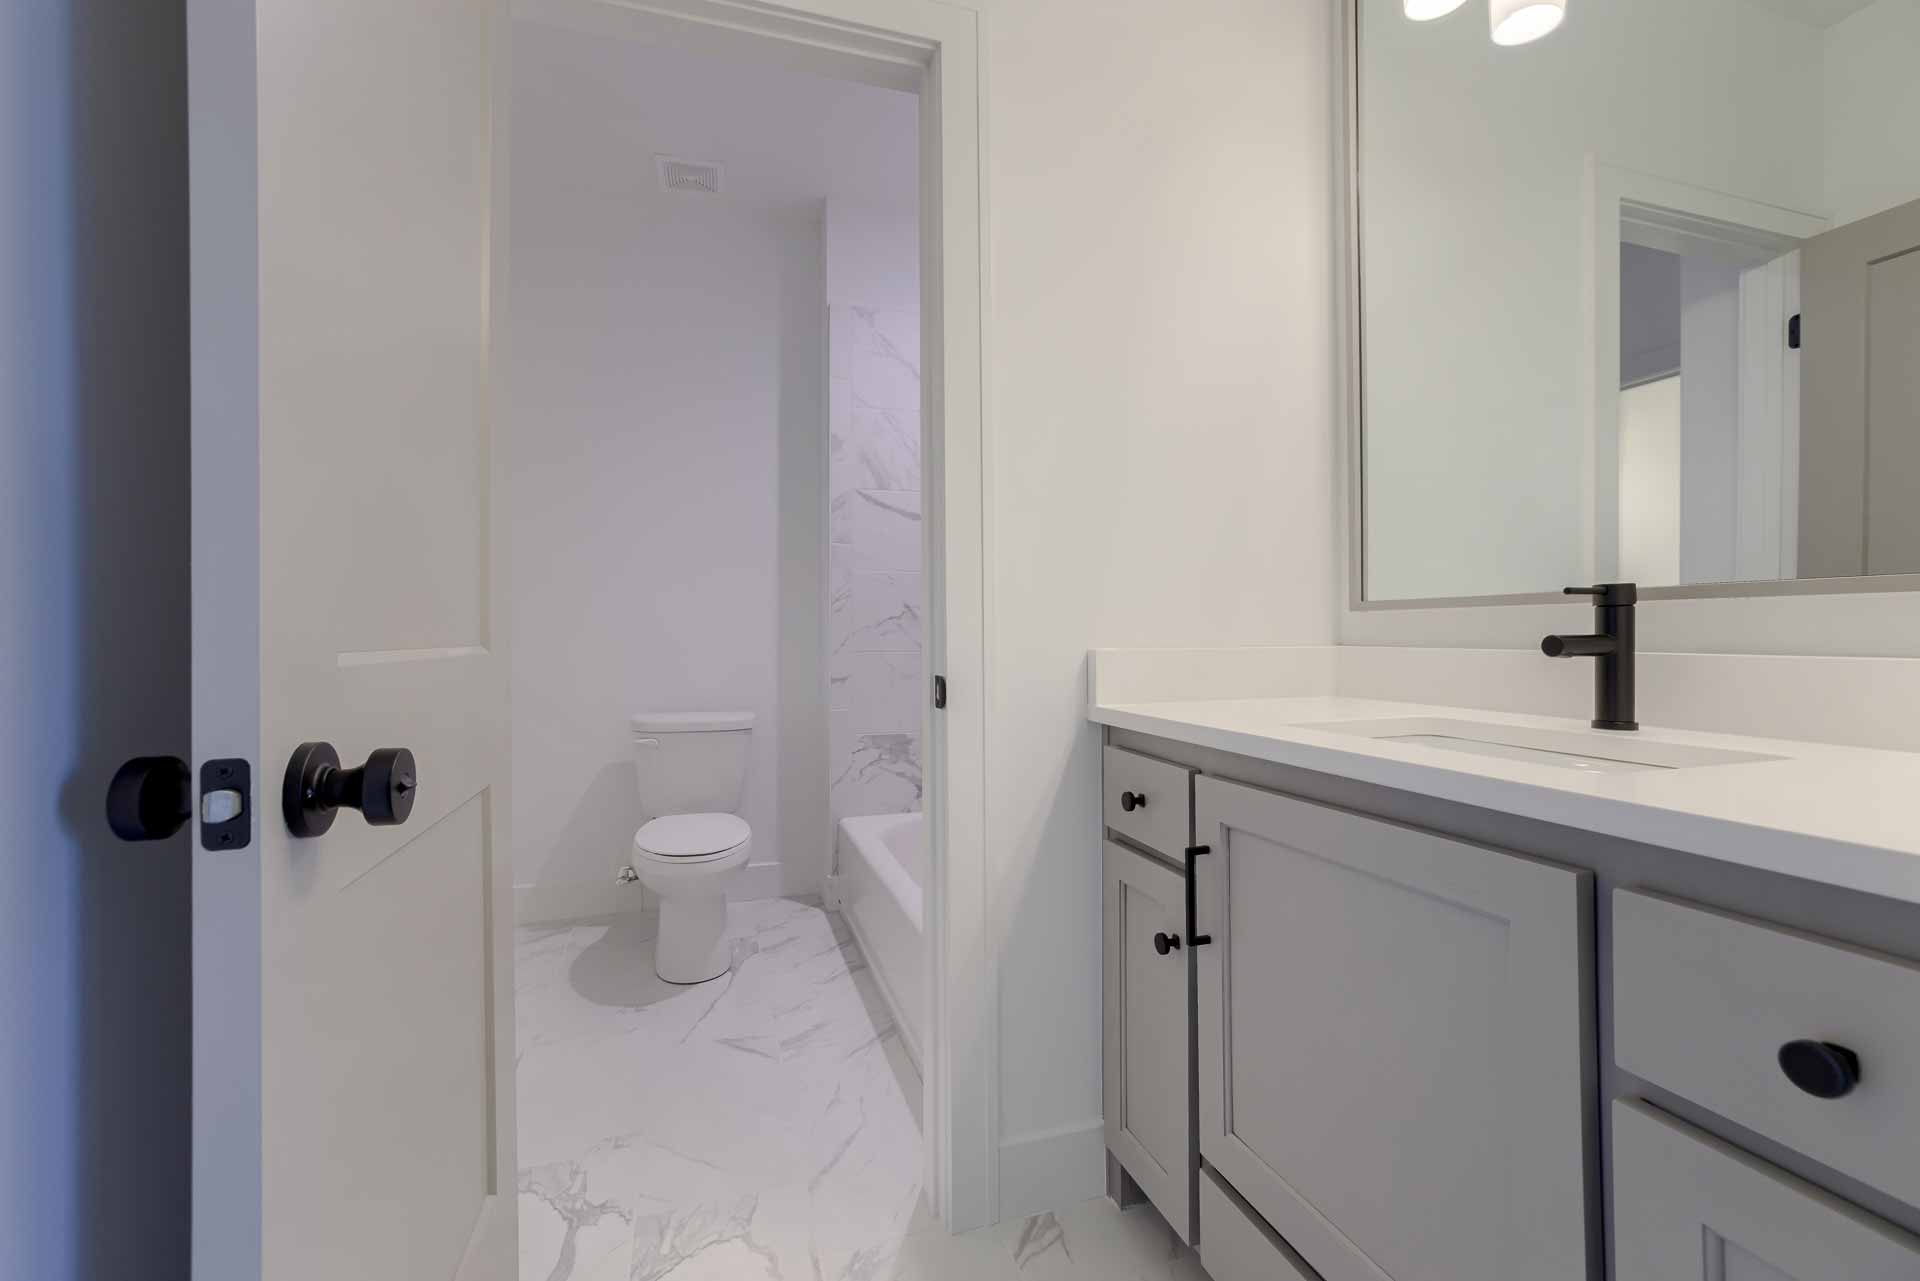 Bathroom with white marble flooring and tiling